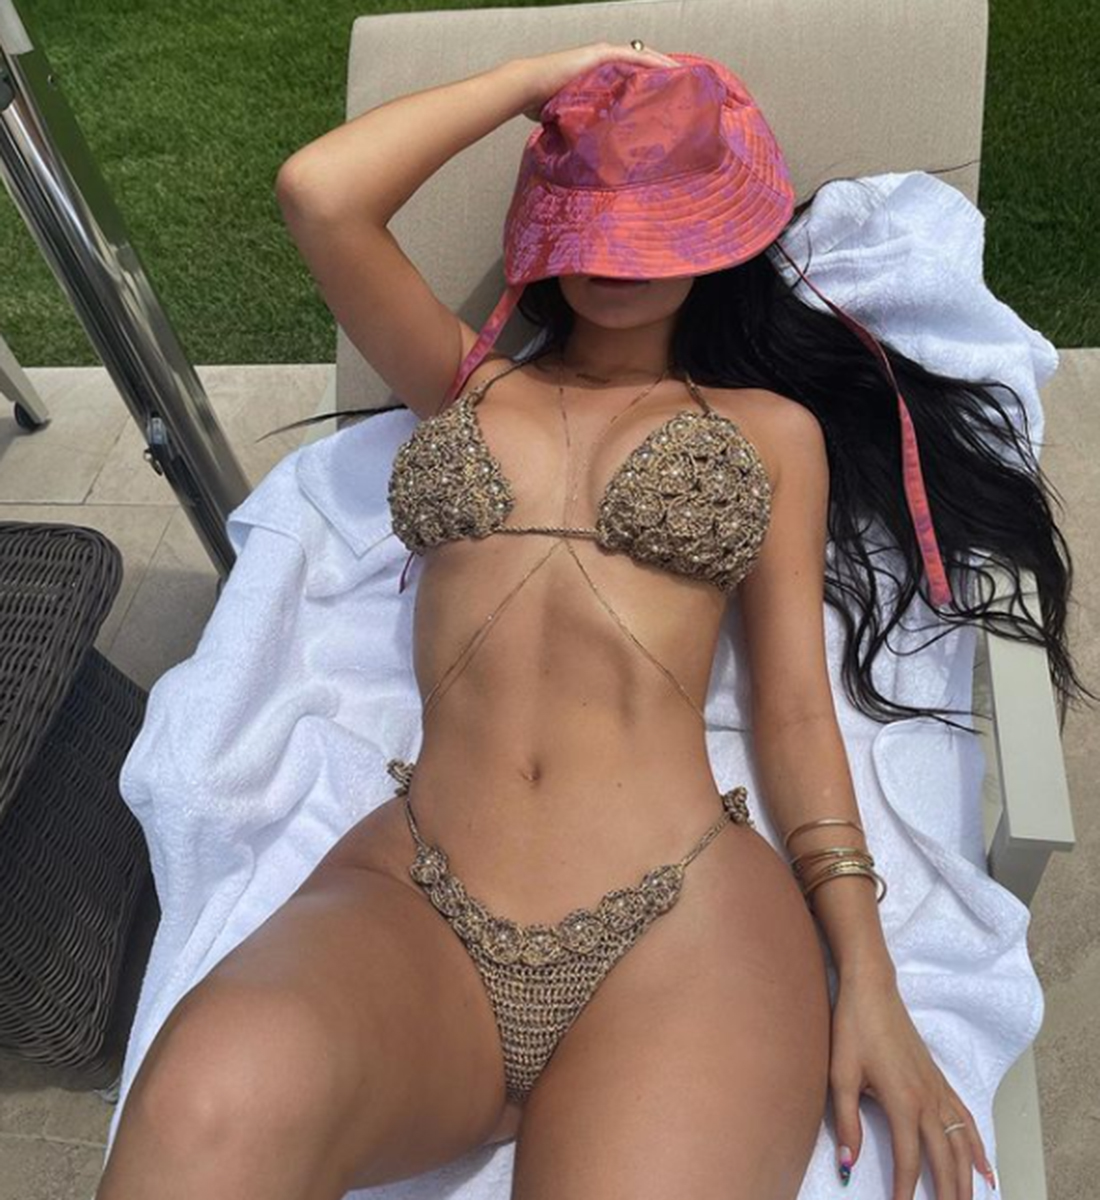 Kylie πη struck again with outrageously revealing photos! 25